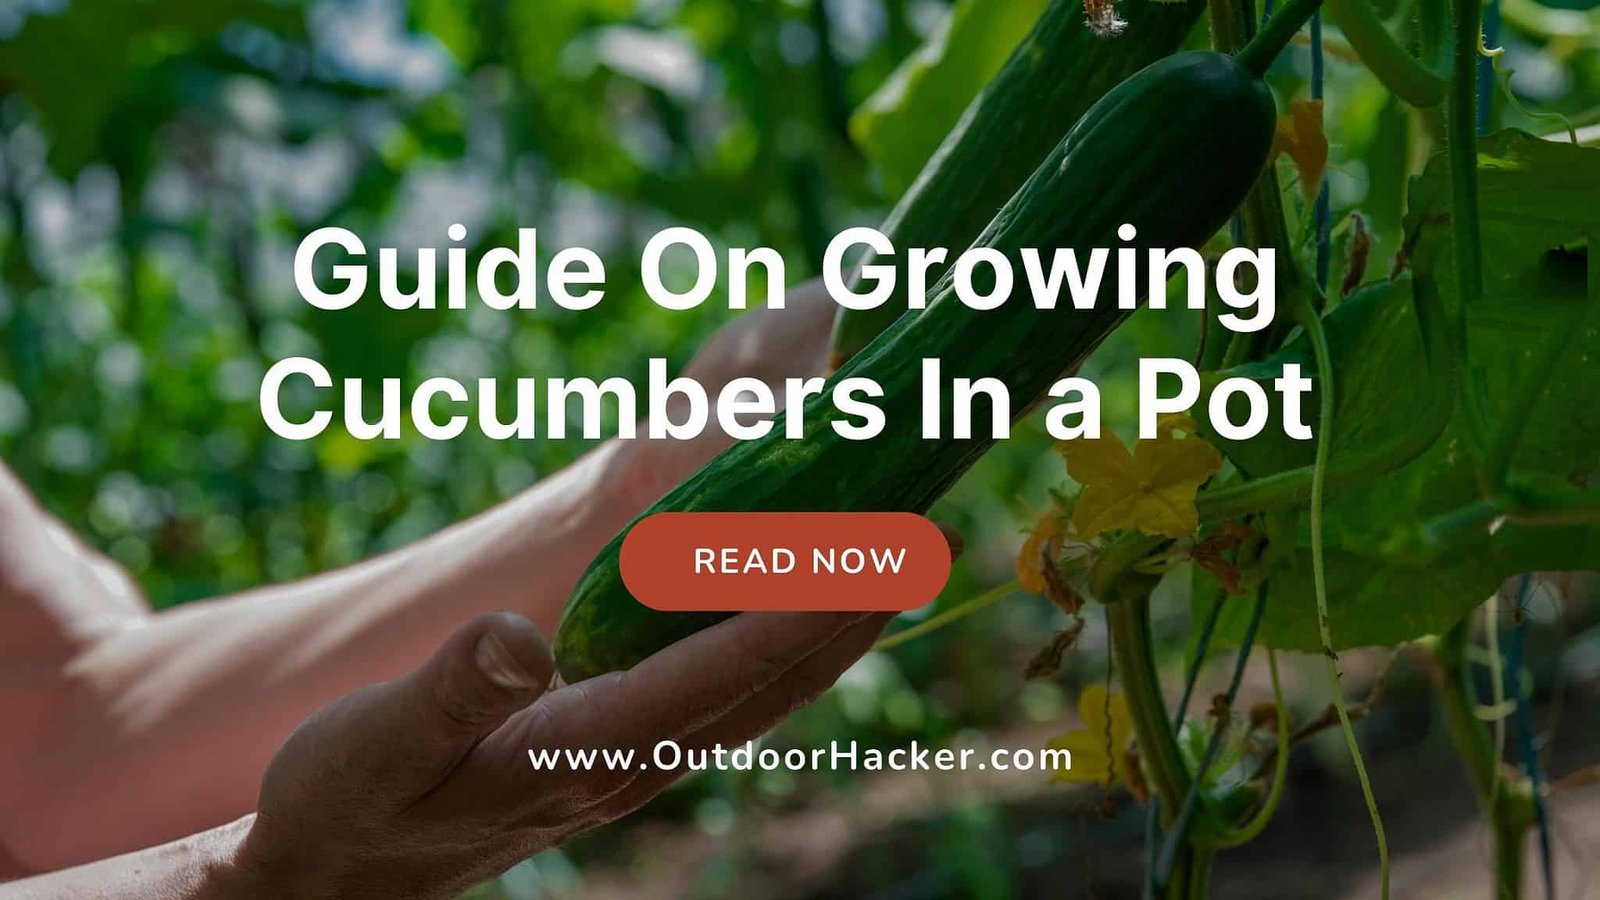 Growing Cucumbers In a Pot